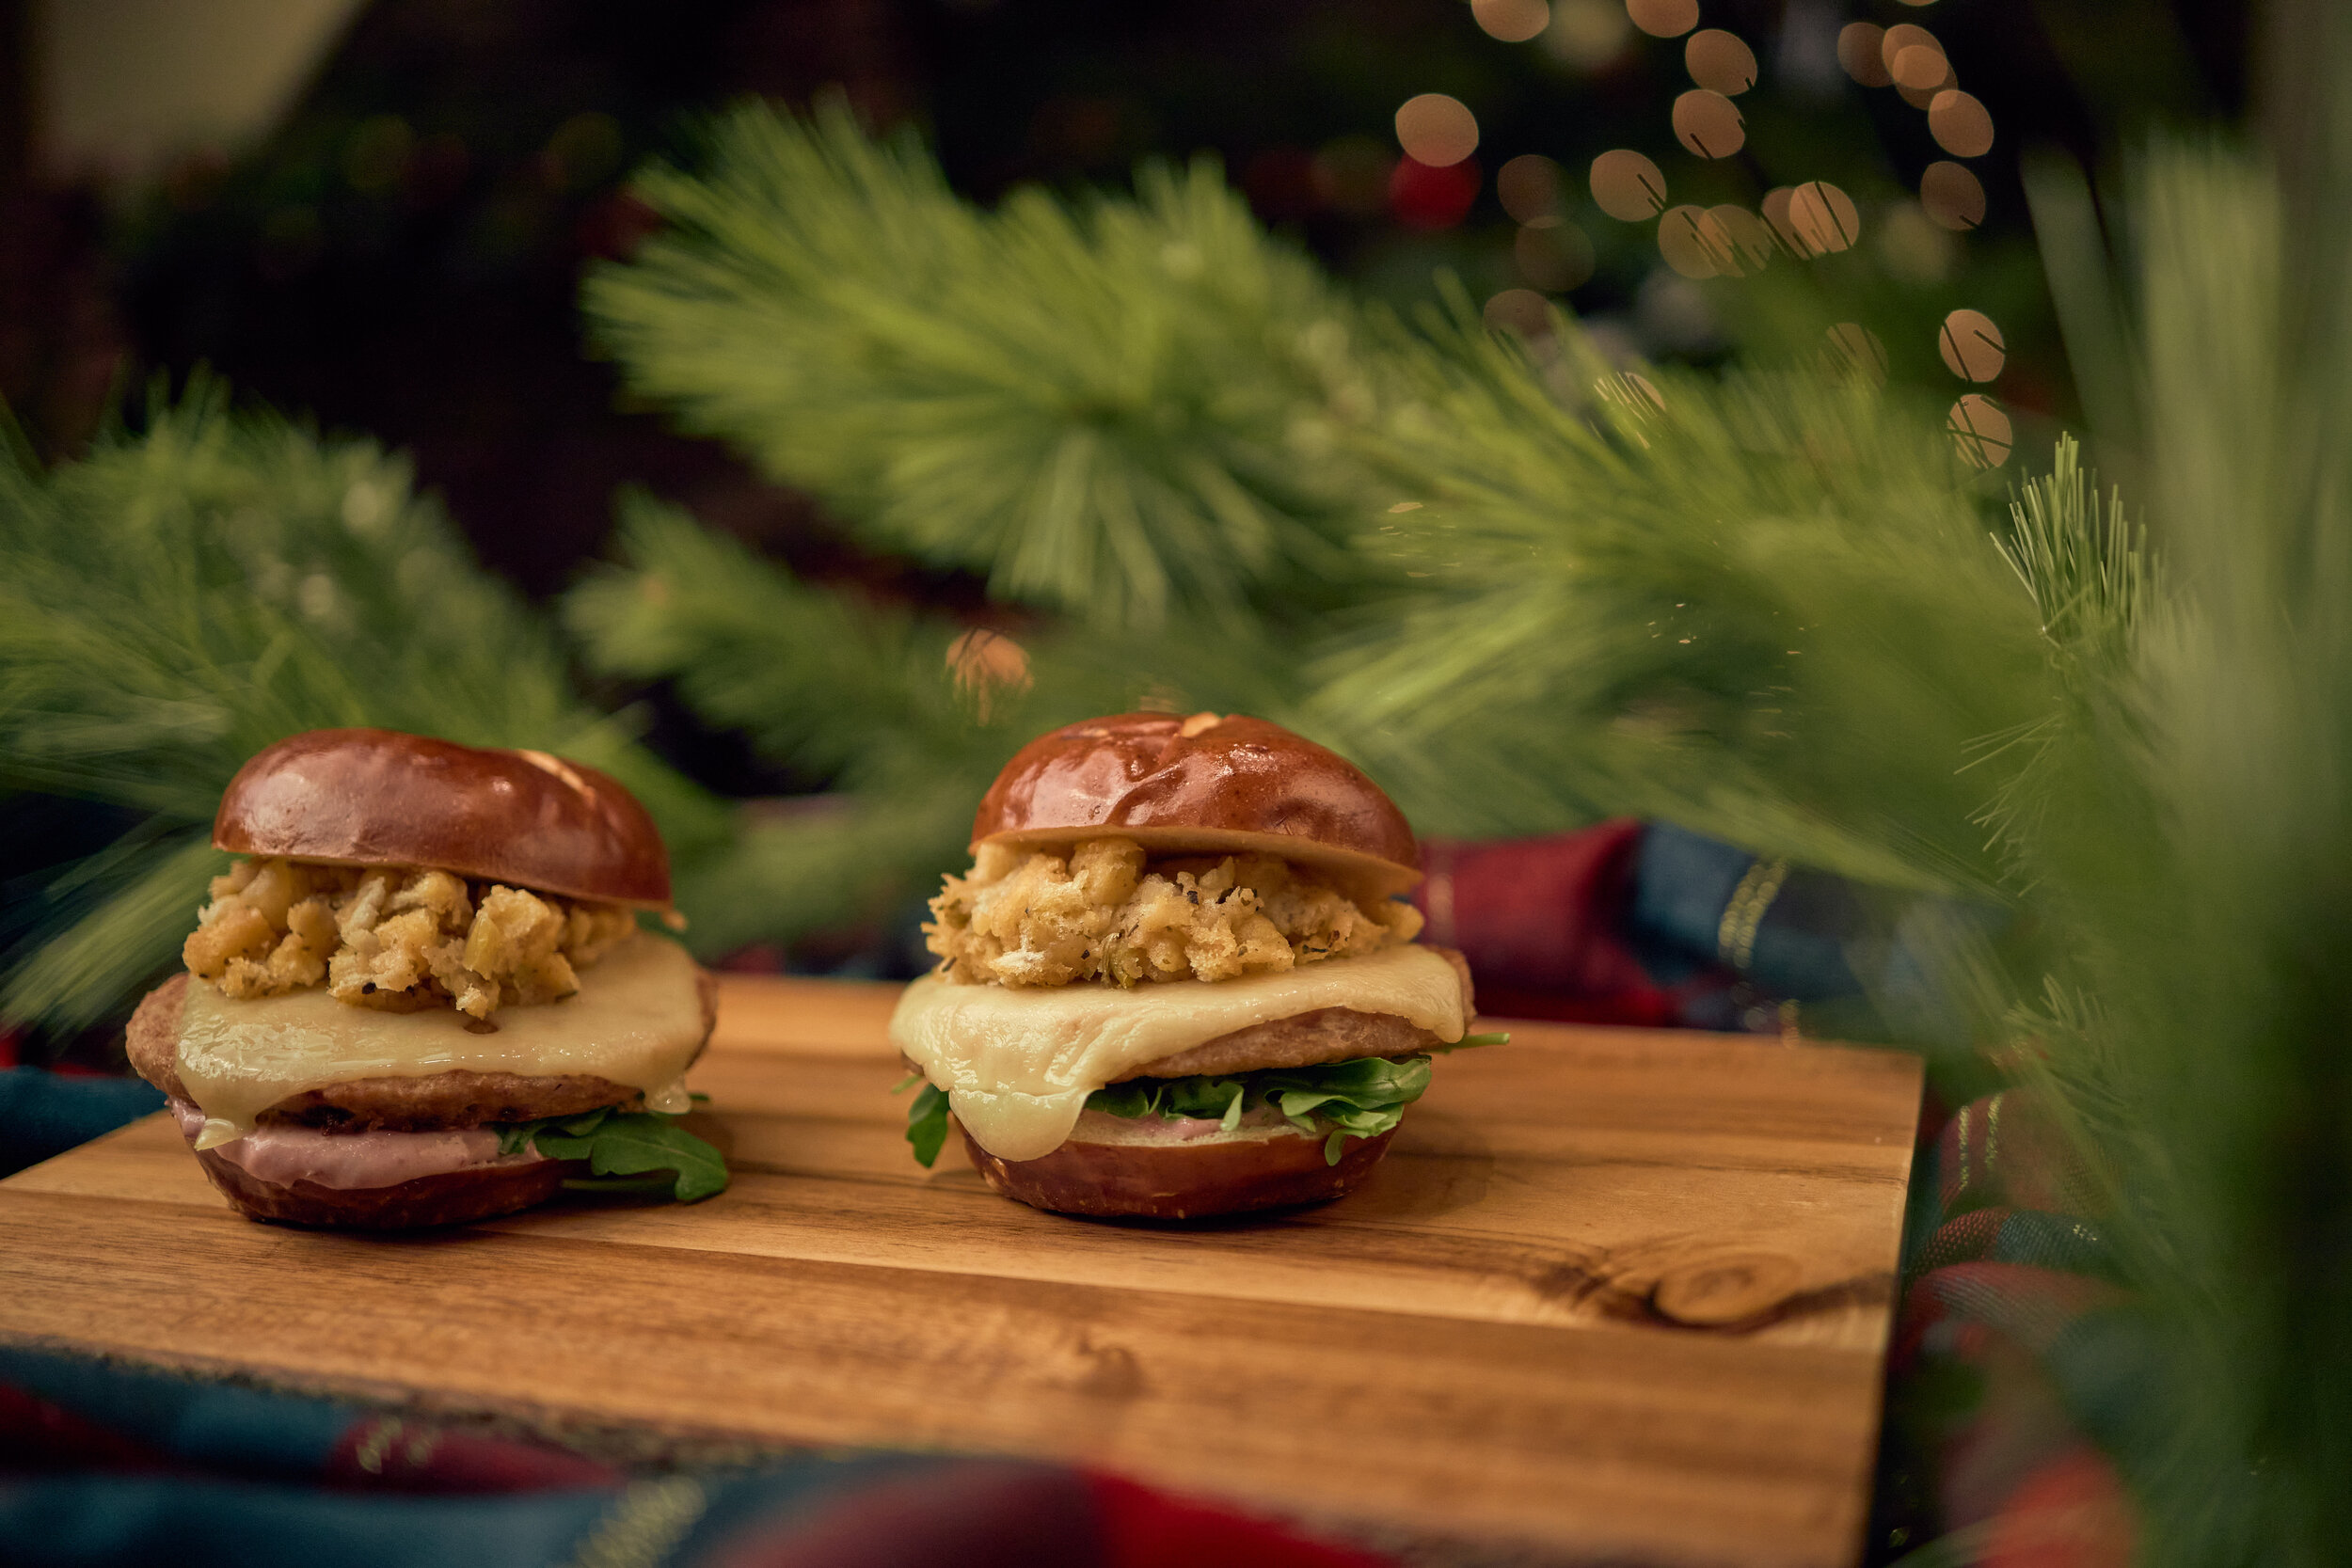 Vixen’s Turkey Burger with Cheese, Cranberry Mayo and Stuffing on a Pretzel Bun